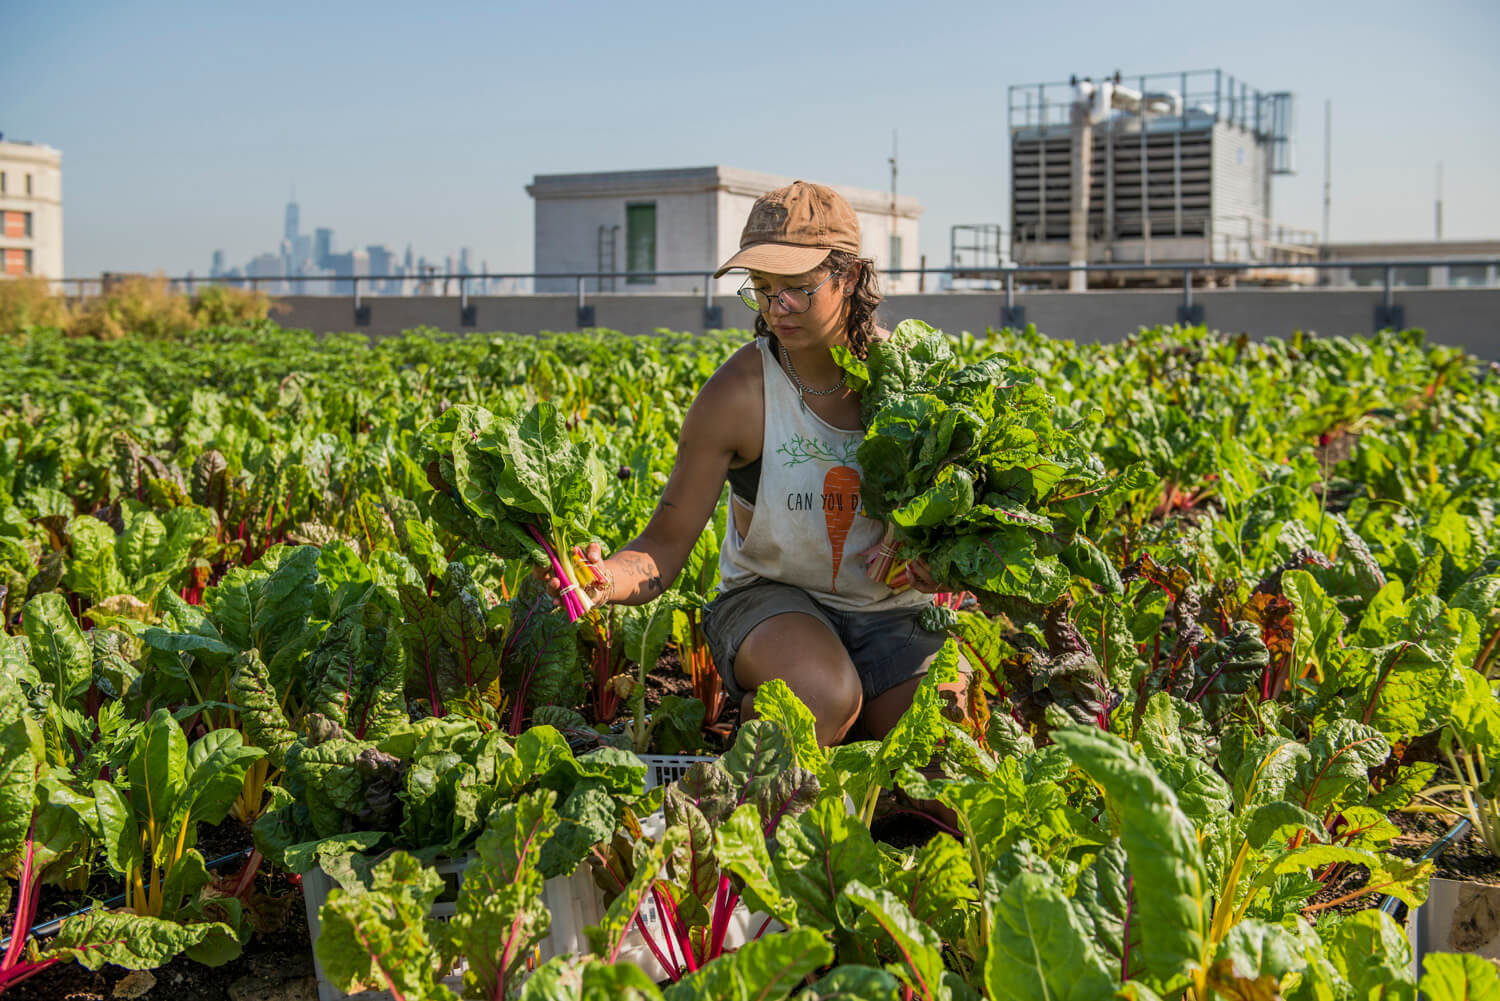 A woman in a tank top and cap kneels amidst a dense urban garden, harvesting chard. The city skyline looms in the background under a clear blue sky, contrasting nature with the urban environment.